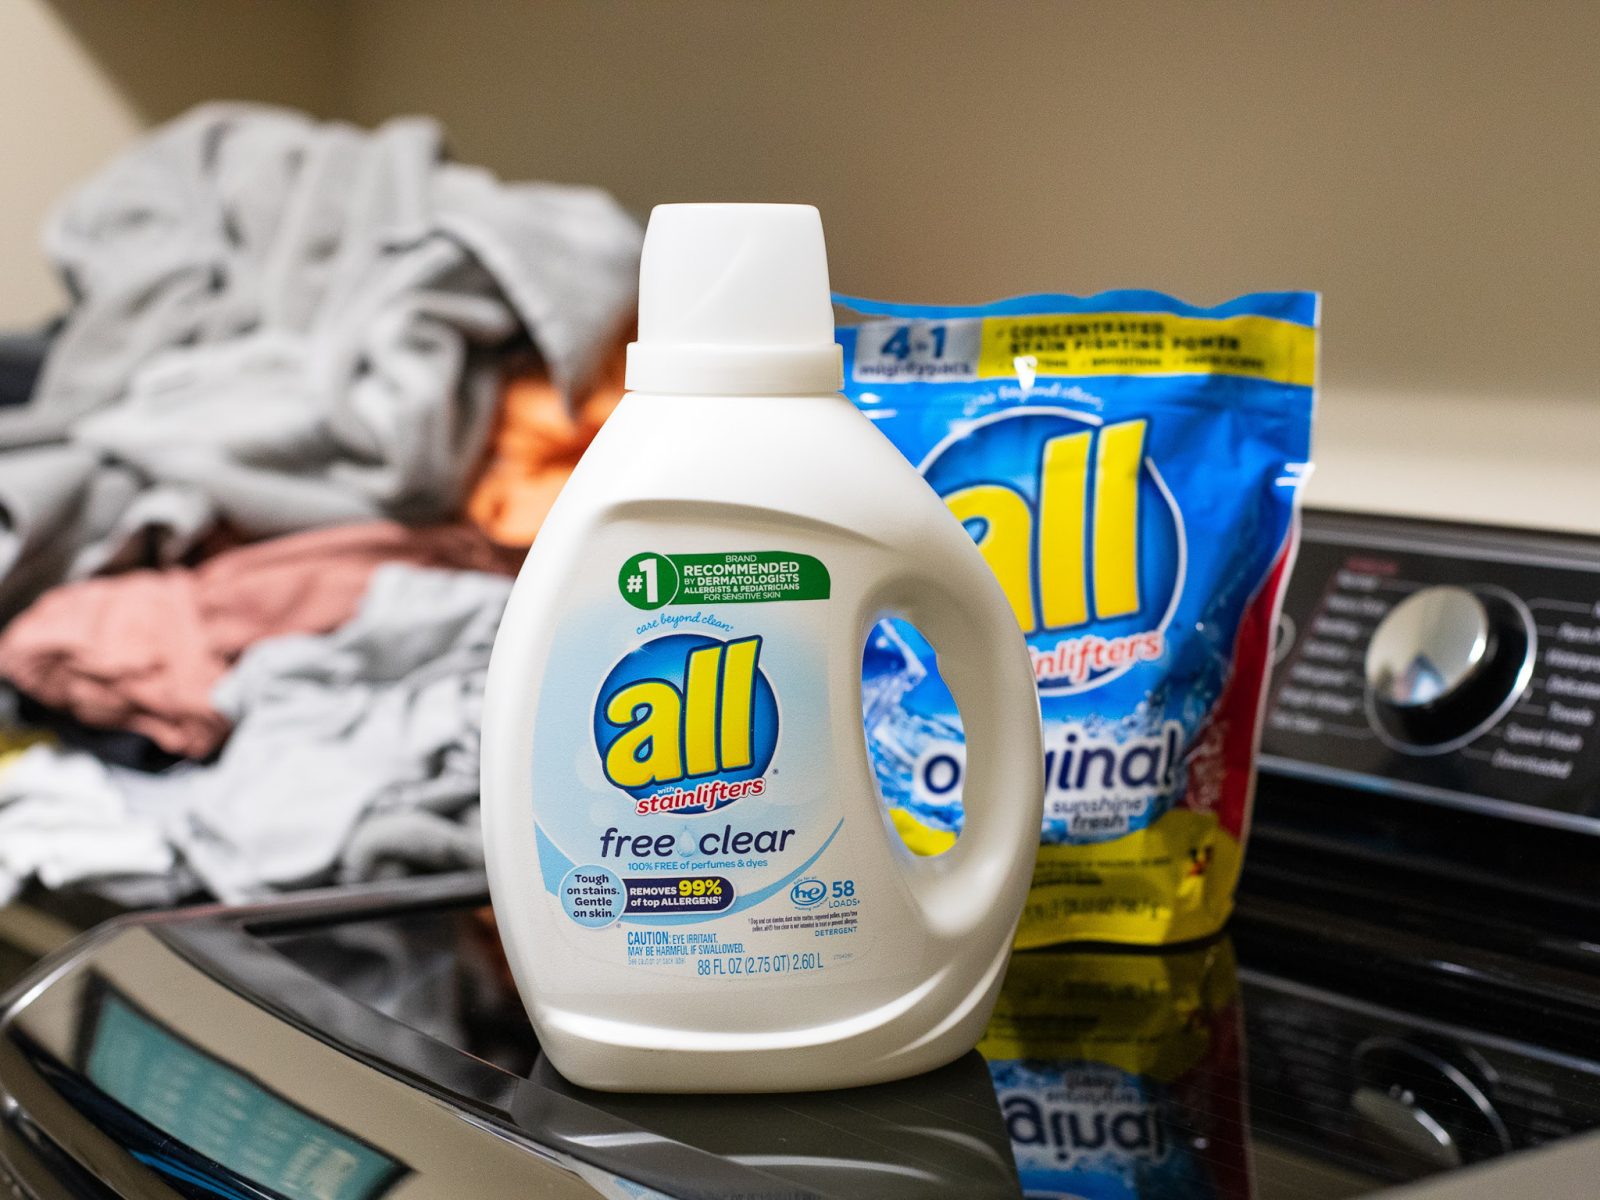 Big Bottles Of All Laundry Detergent Are As Low As $4.85 At Publix (Regular Price $12.19)